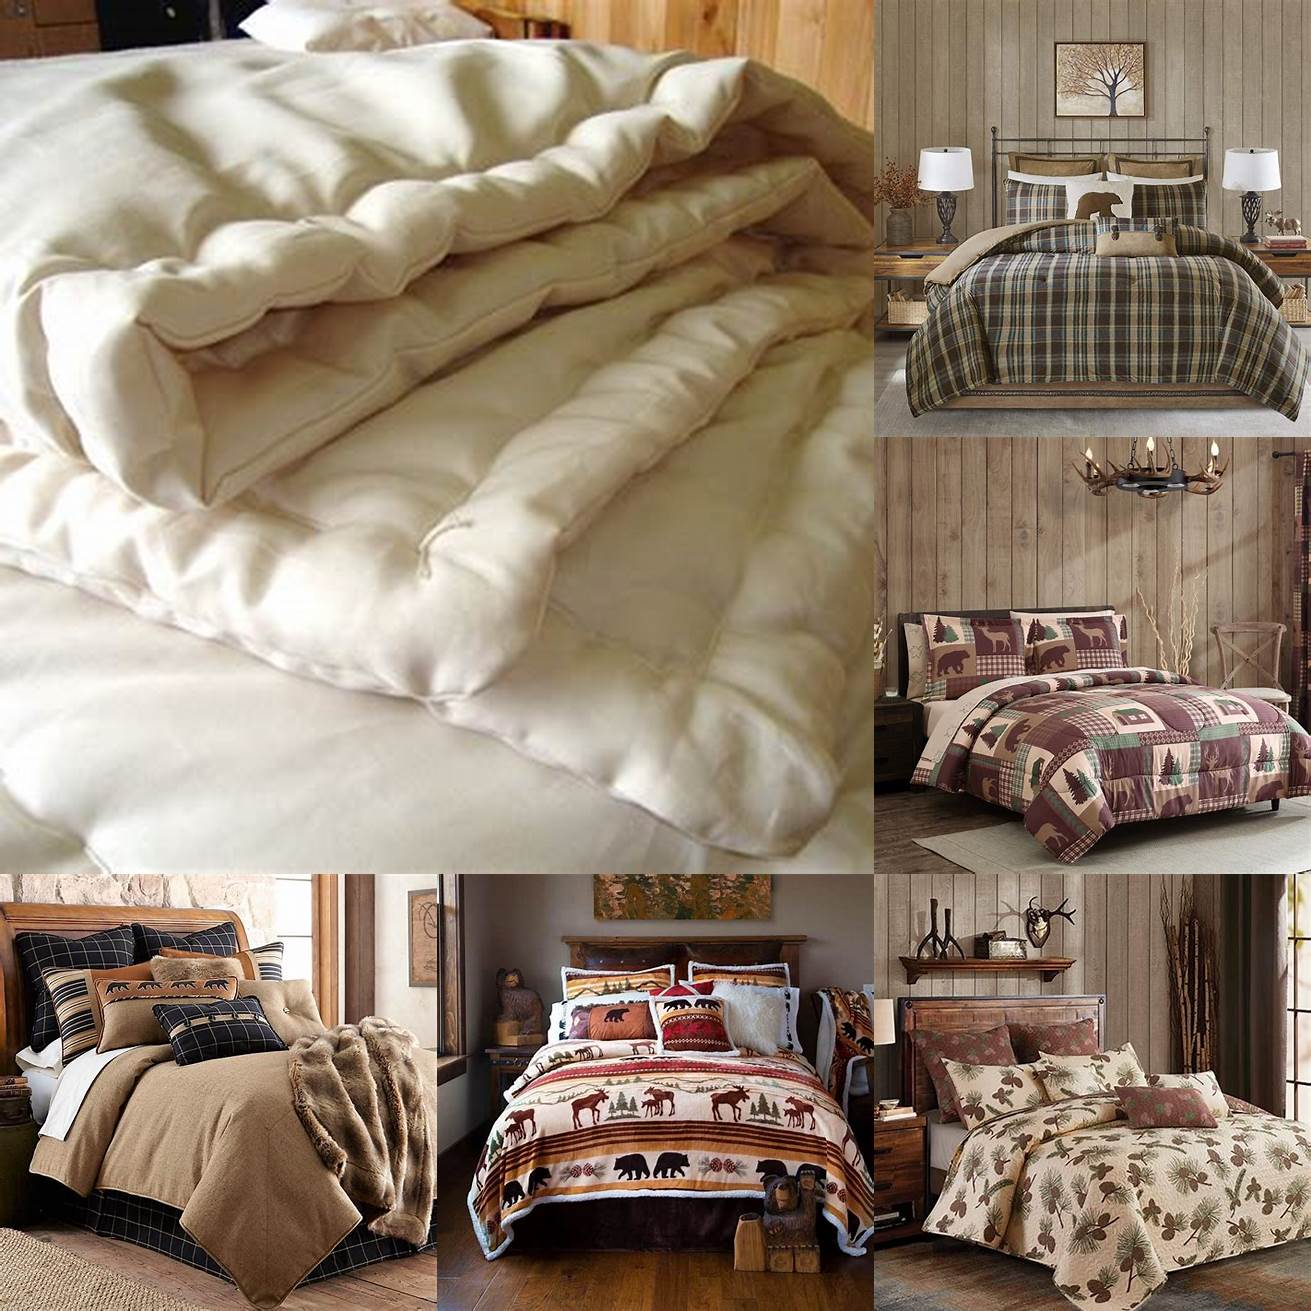 Wool cabin bedding provides extra warmth during cold nights